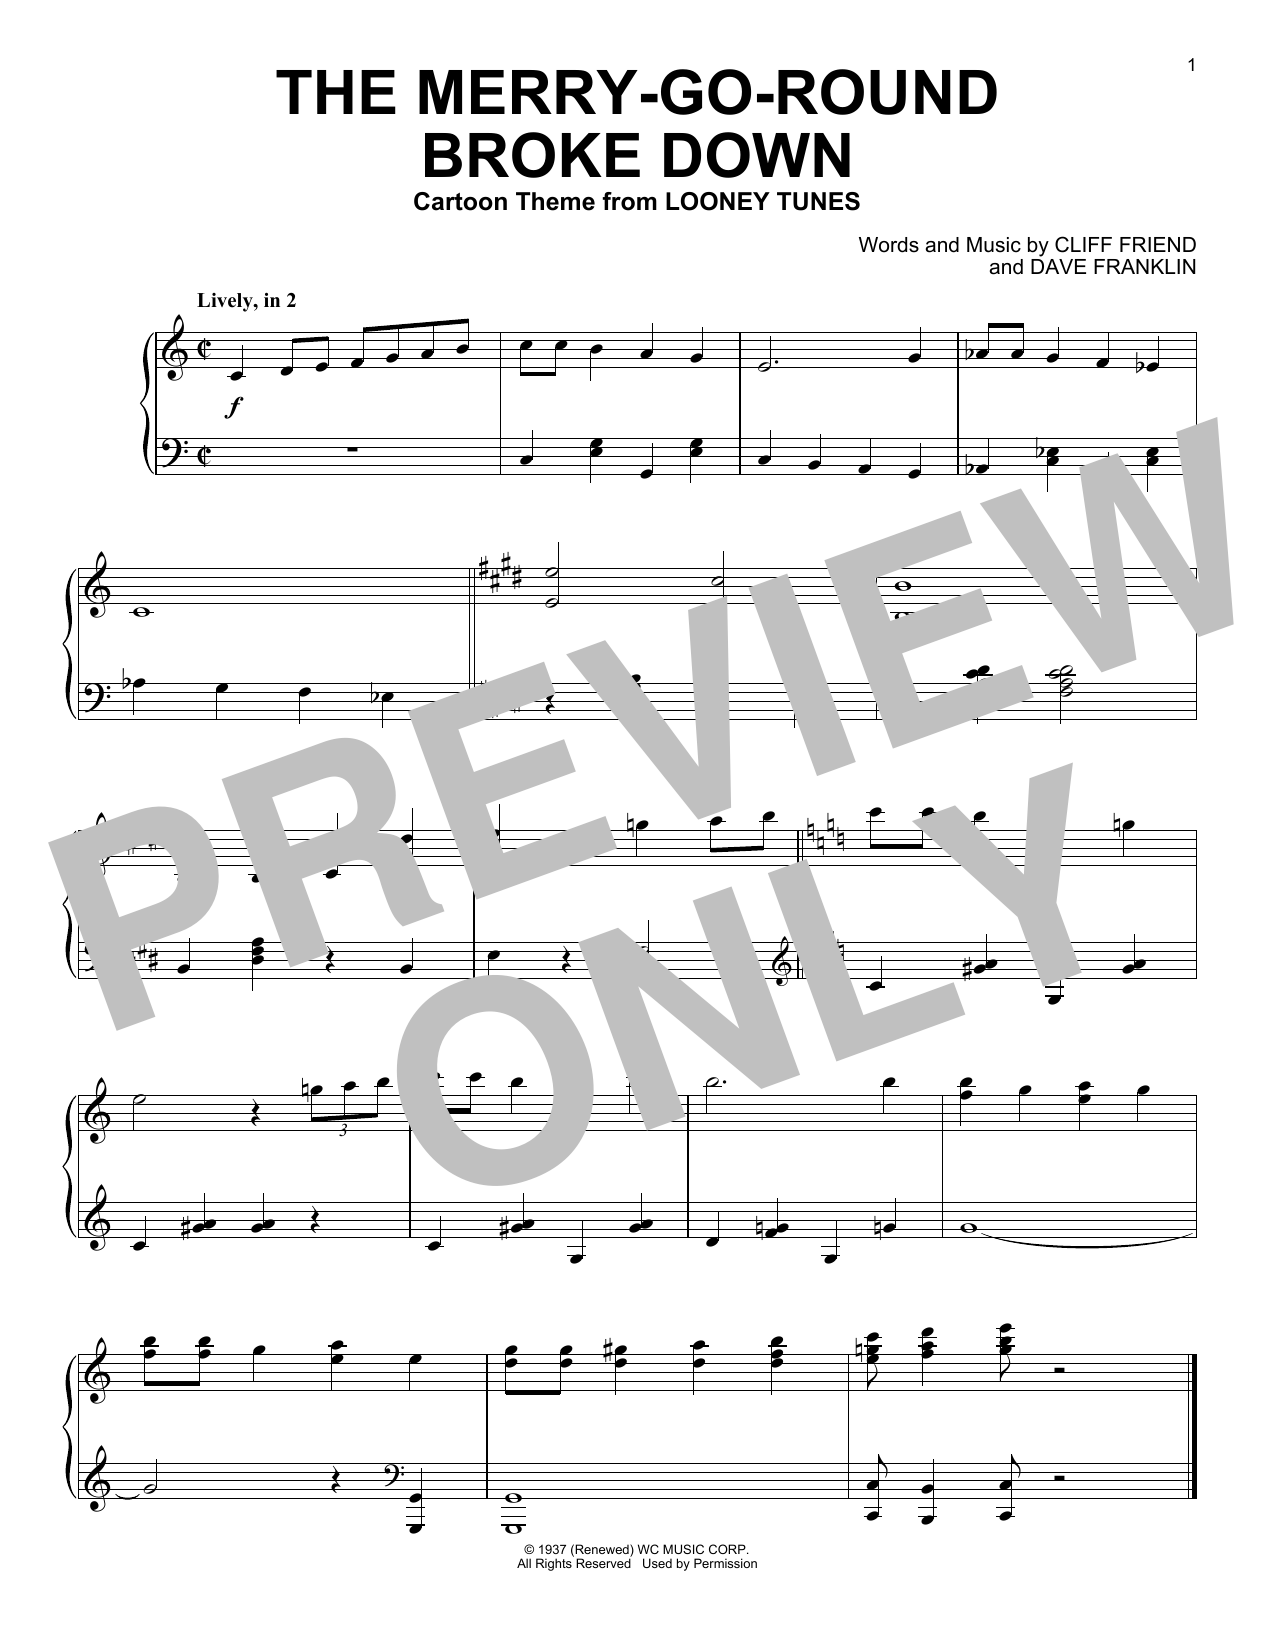 Cliff Friend & Dave Franklin The Merry-Go-Round Broke Down (from Looney Tunes) sheet music preview music notes and score for Piano Solo including 1 page(s)